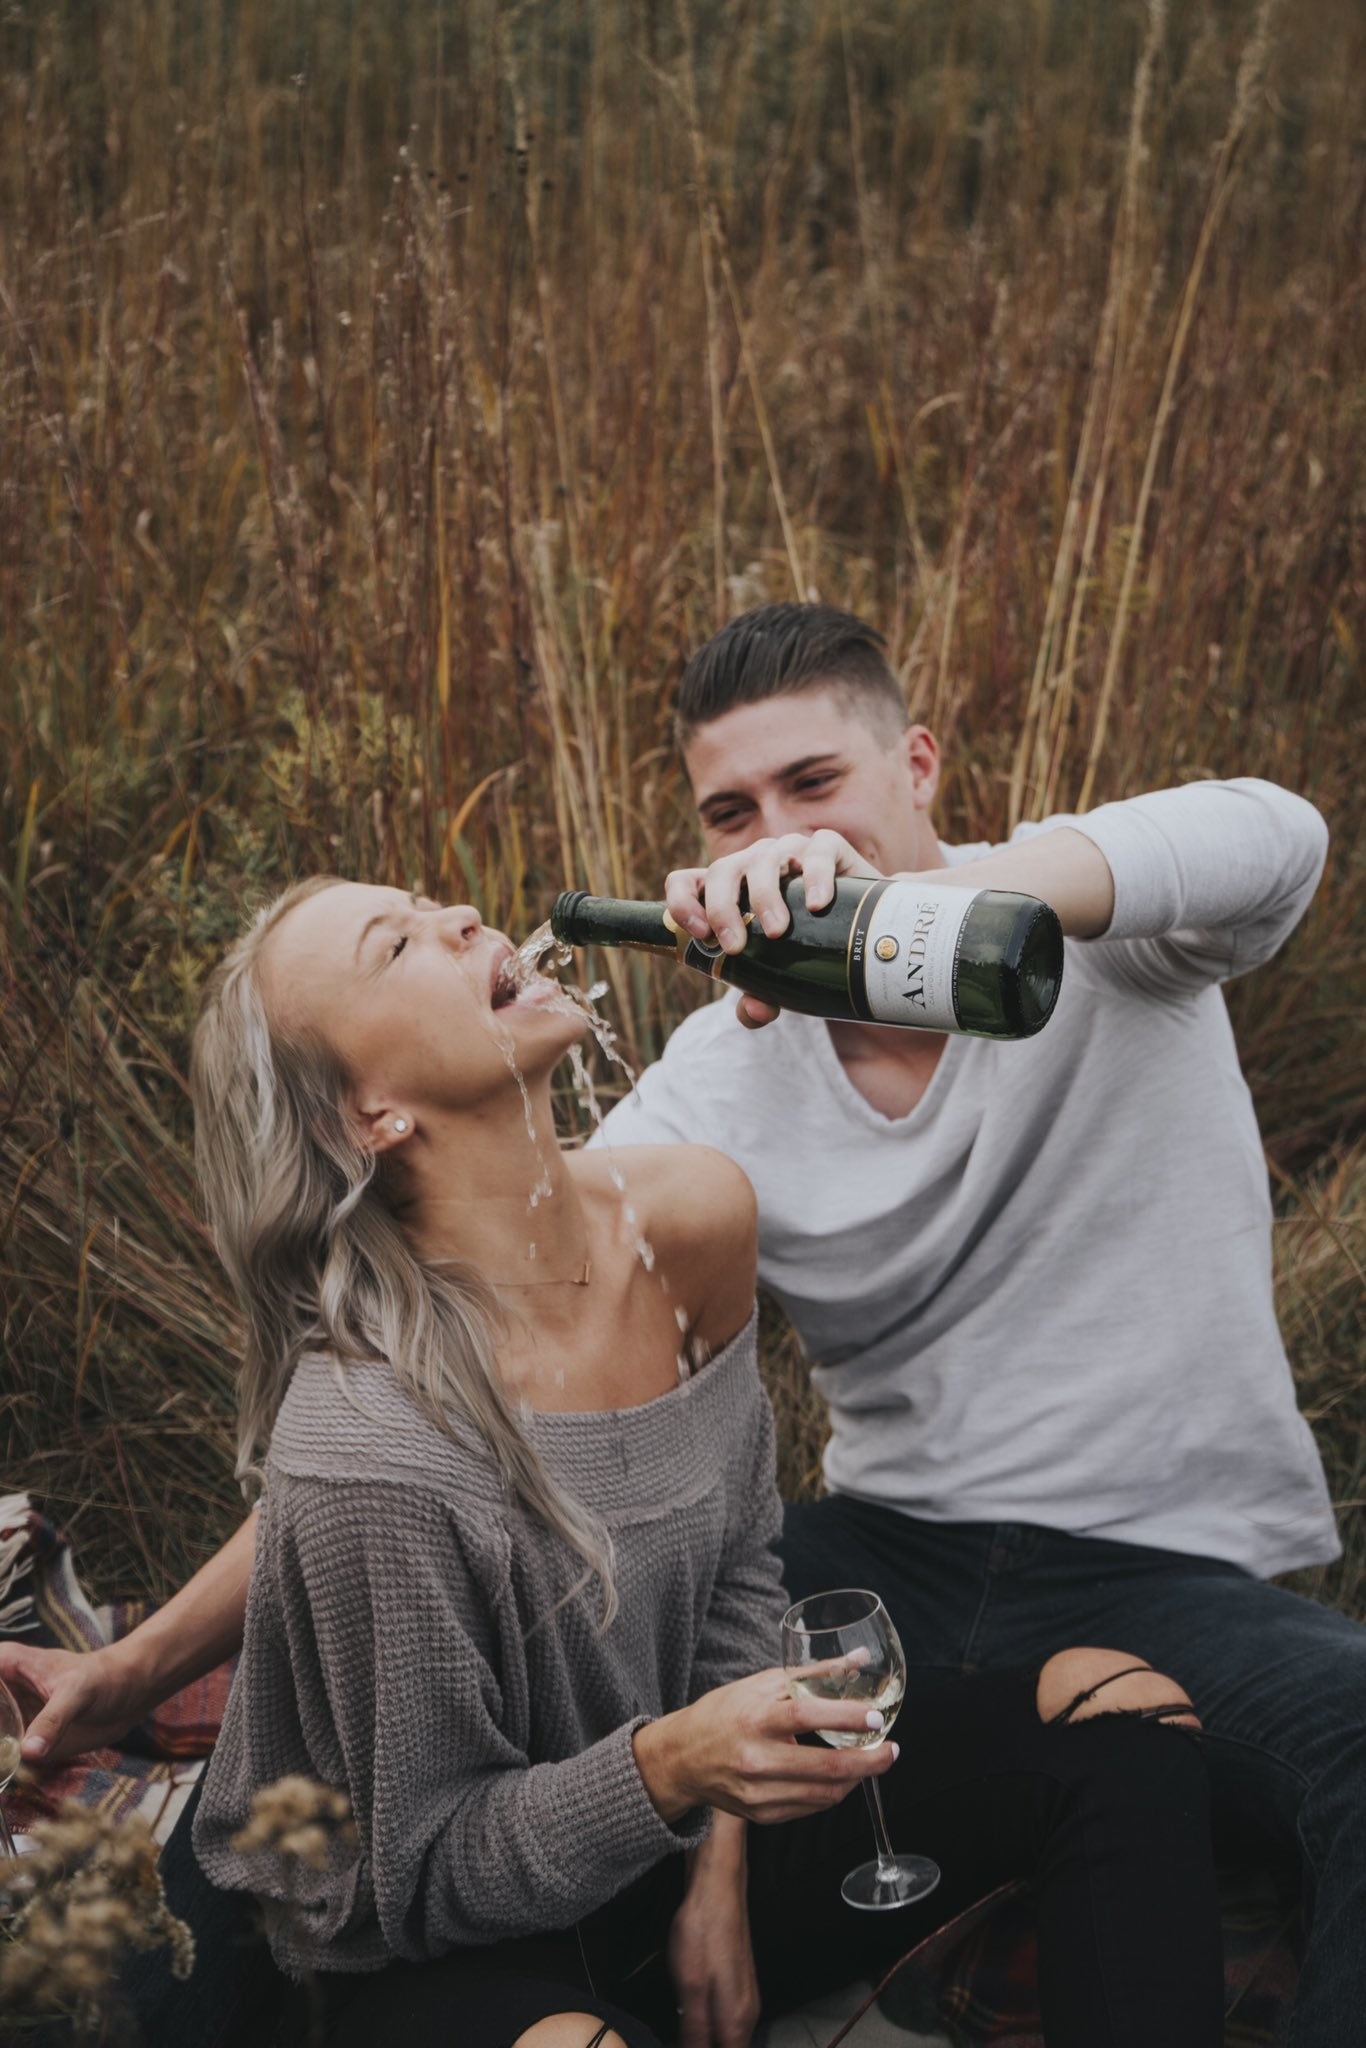 Champagne Engagement Photo Fail Goes Viral